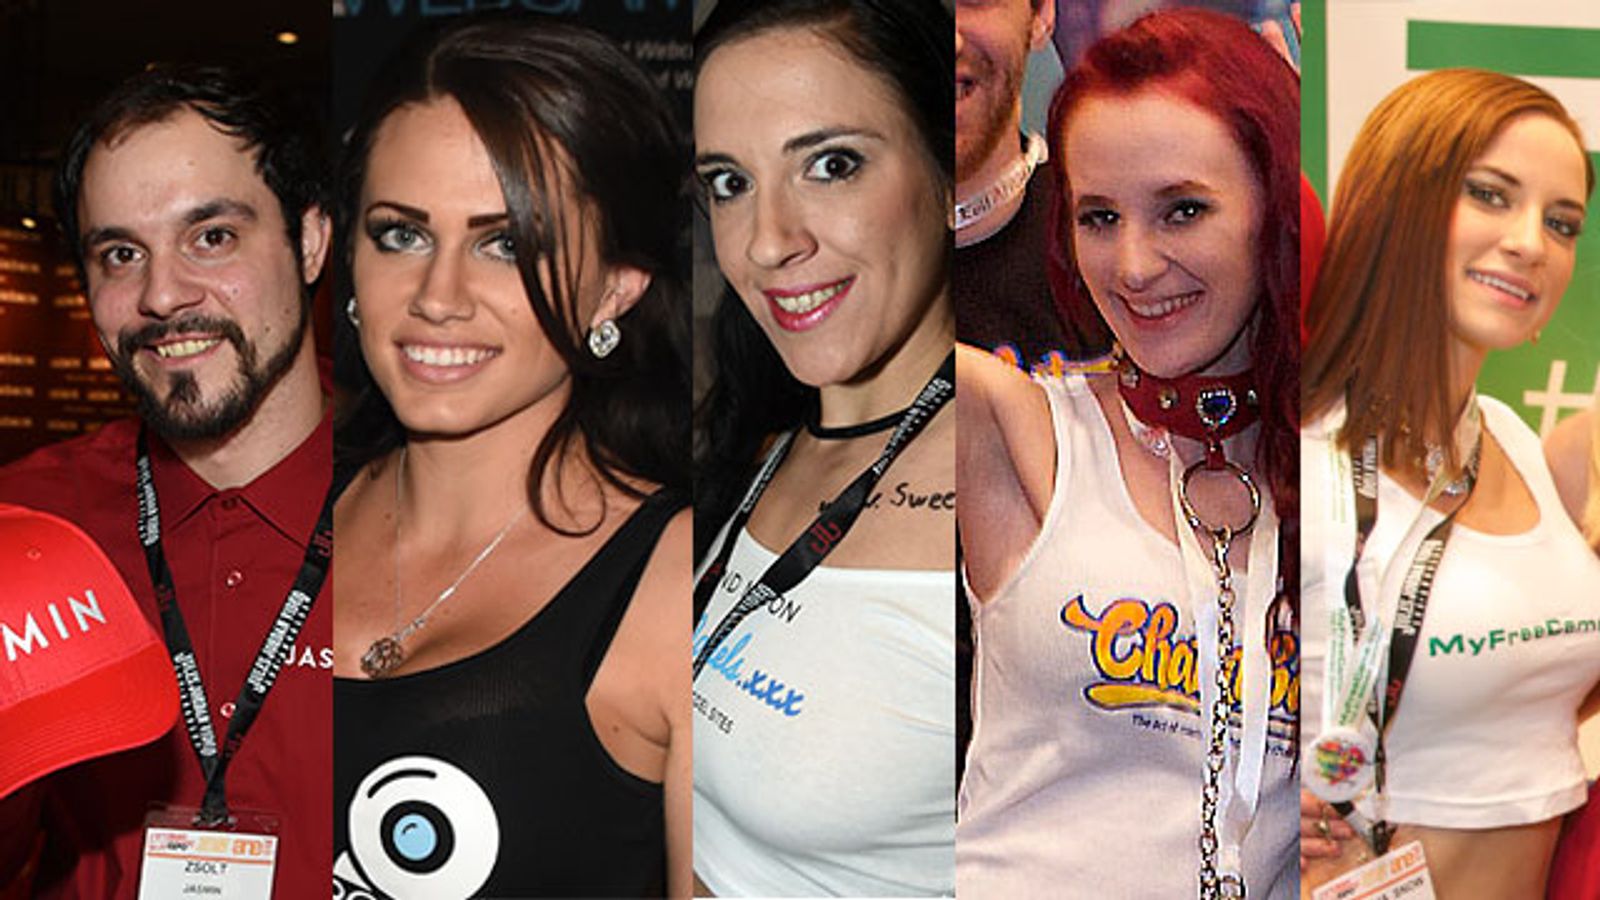 Live and in the Flesh: Cam Girls Meet the Fans at AEE